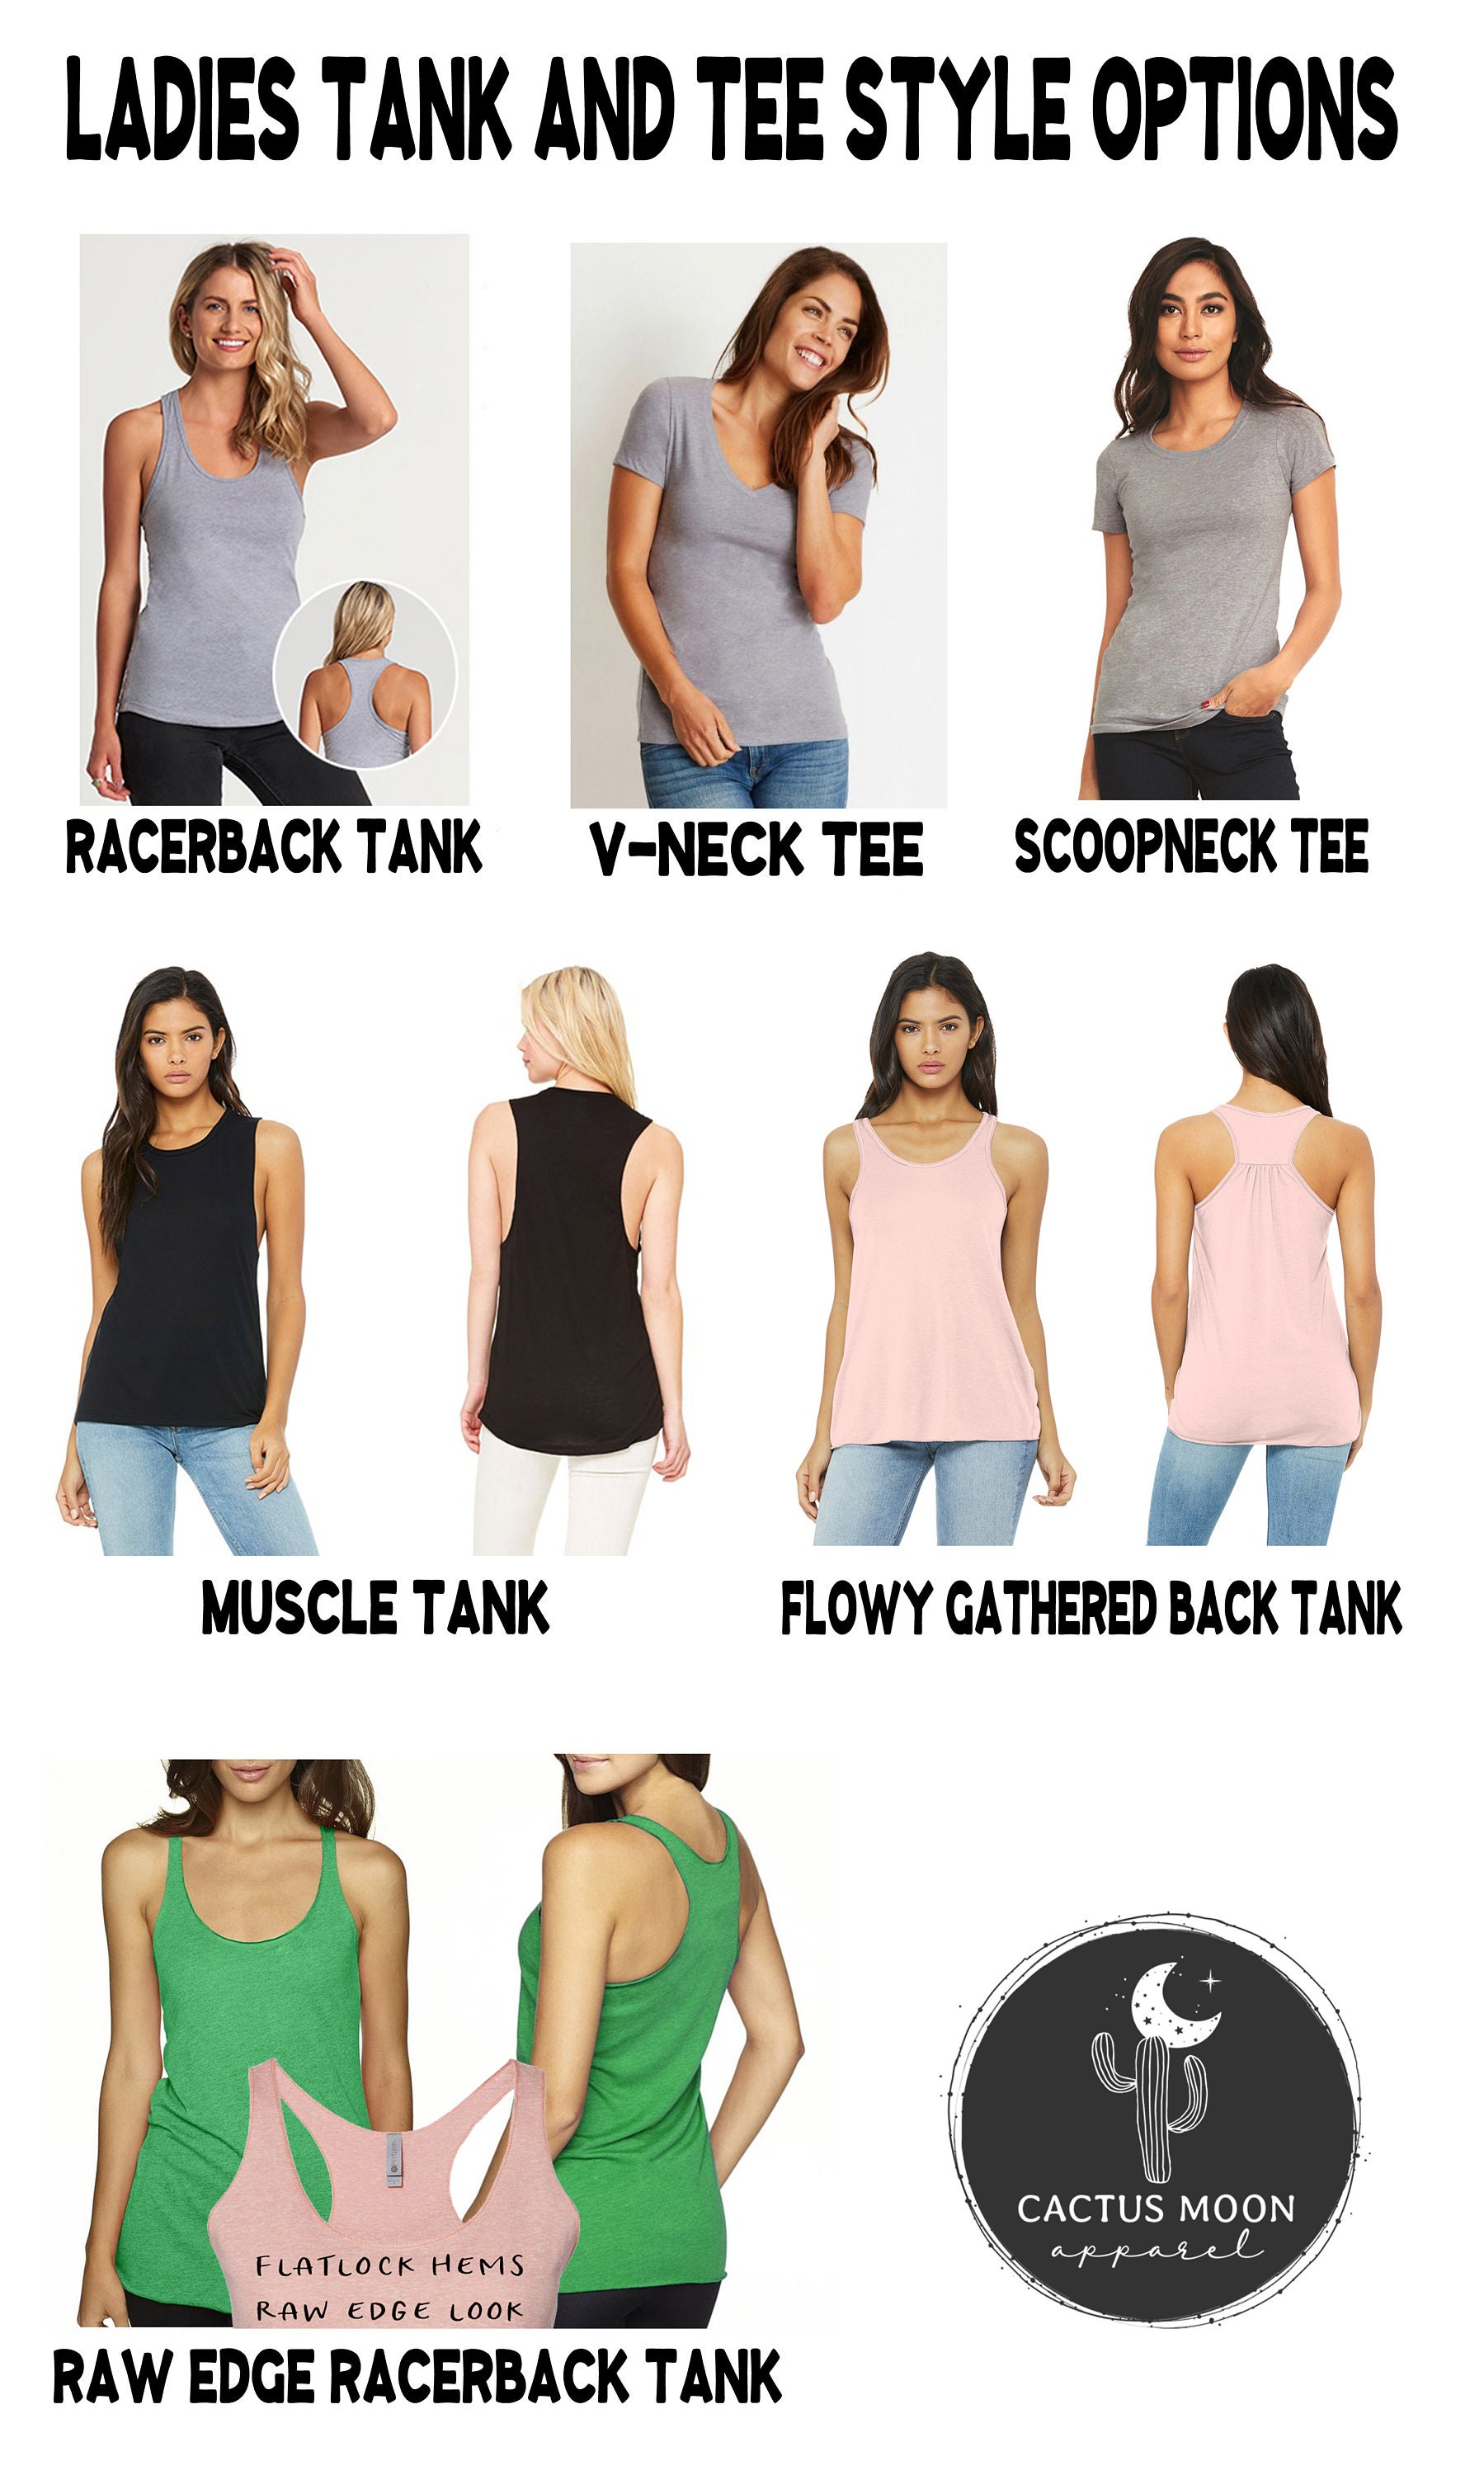 Ladies Groovy Pit Crew Racerback Tank Top, Scoopneck Shirt, V-neck Shirt,  or Muscle Tank, Pit Crew Race Day Tank or Shirt 